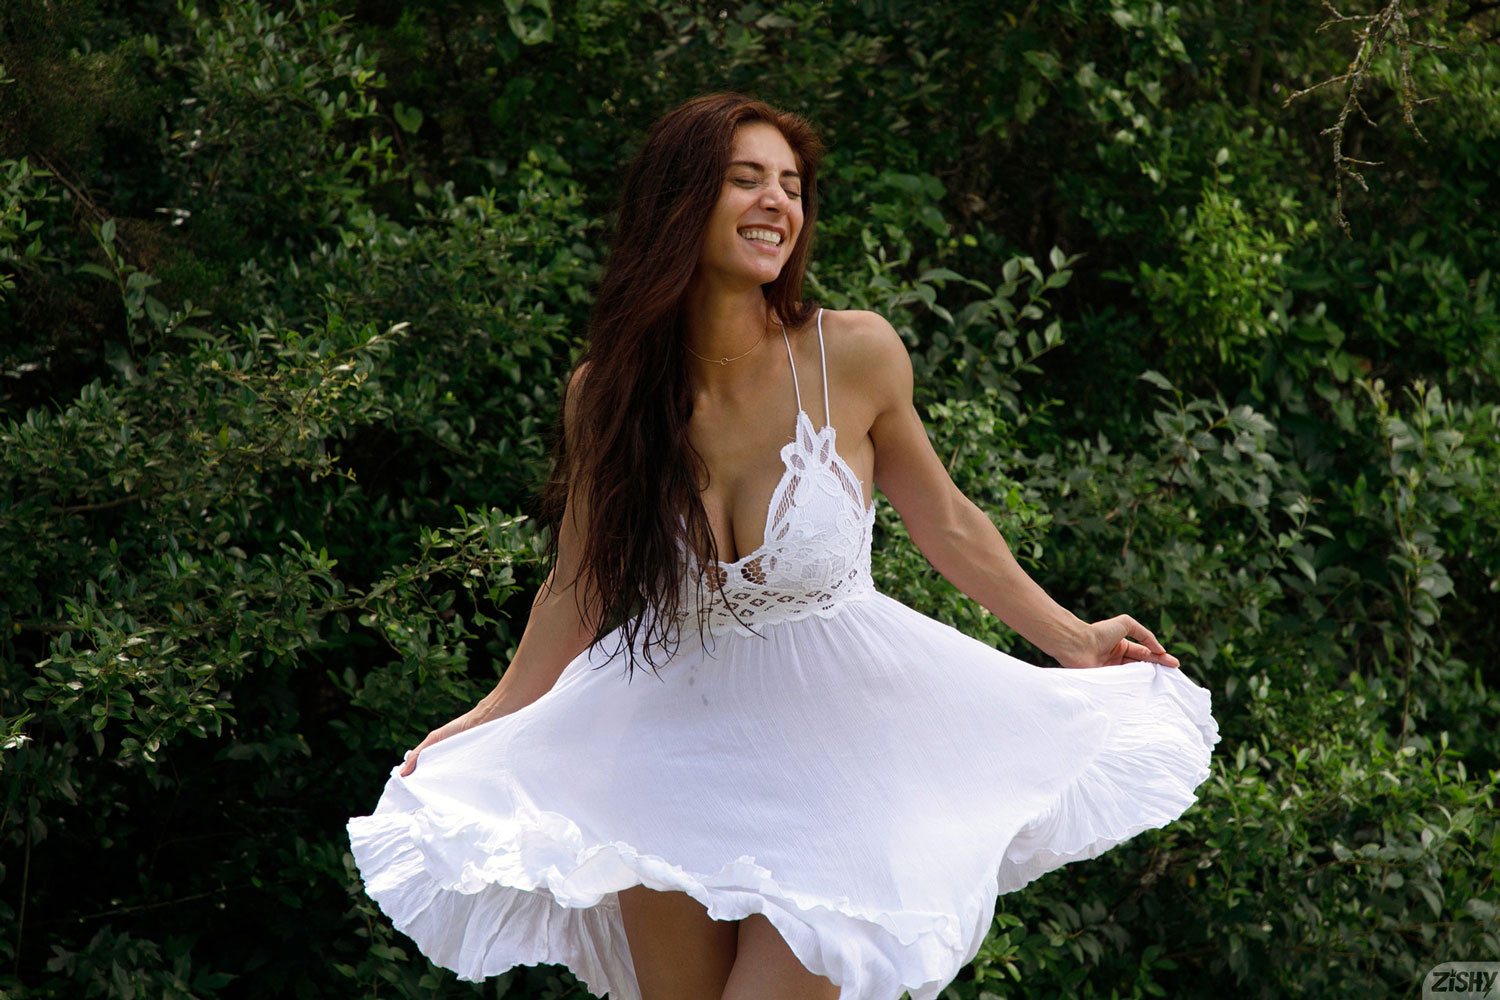 Vynessa Lucero in a White Dress